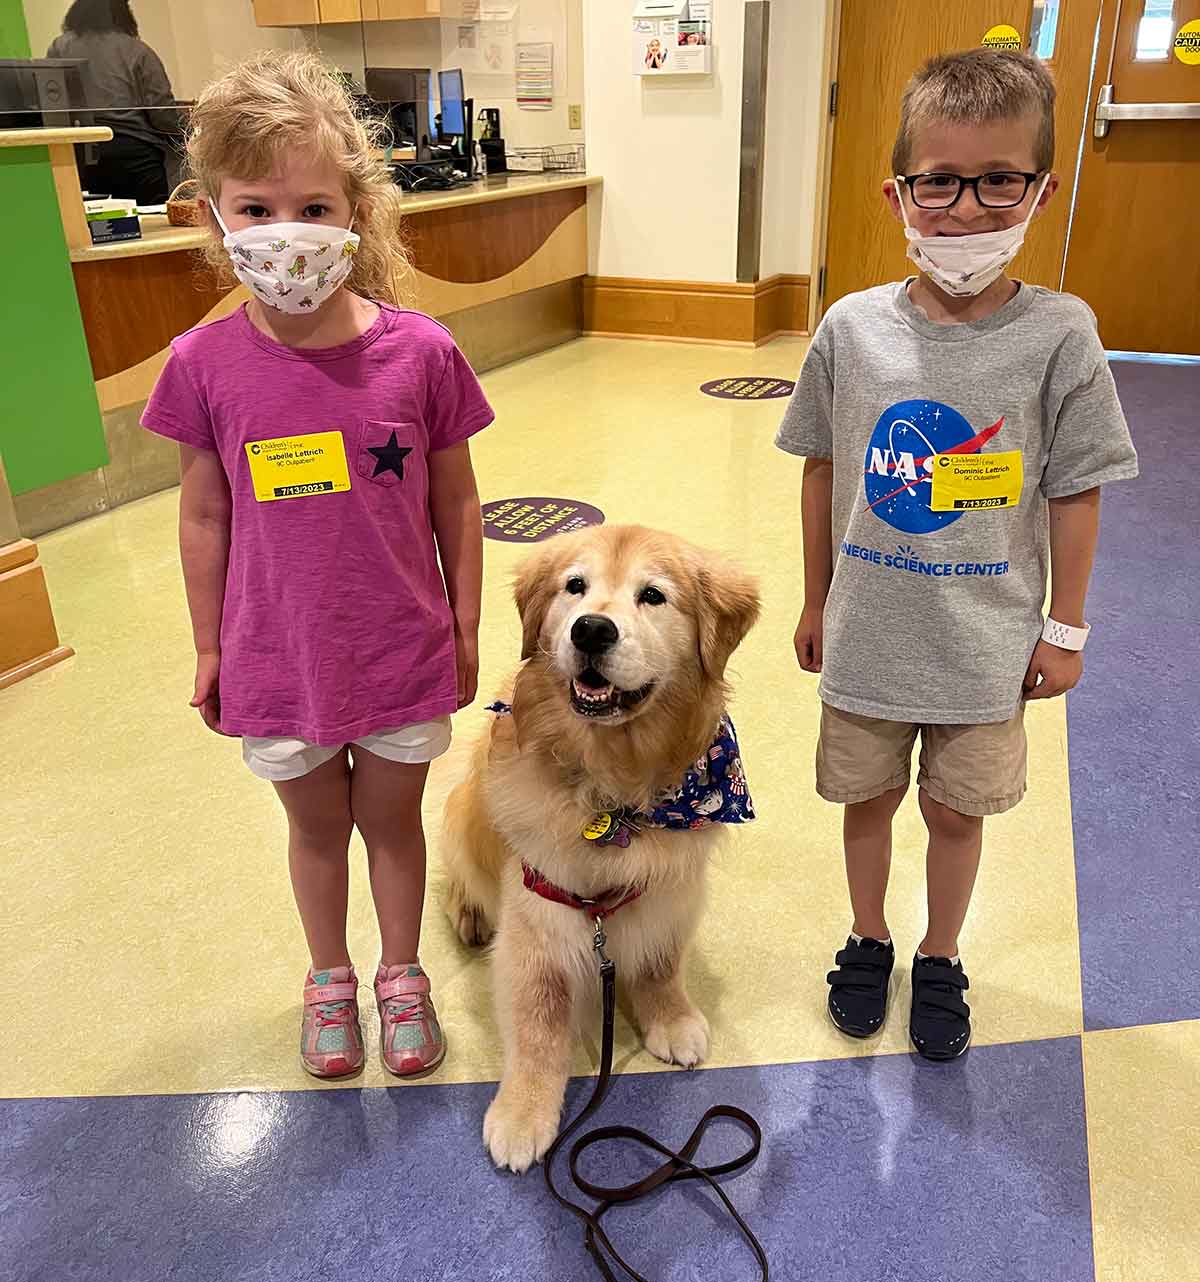 A girl and a boy posing for a photo with a Golden Retriever dog sitting between them.